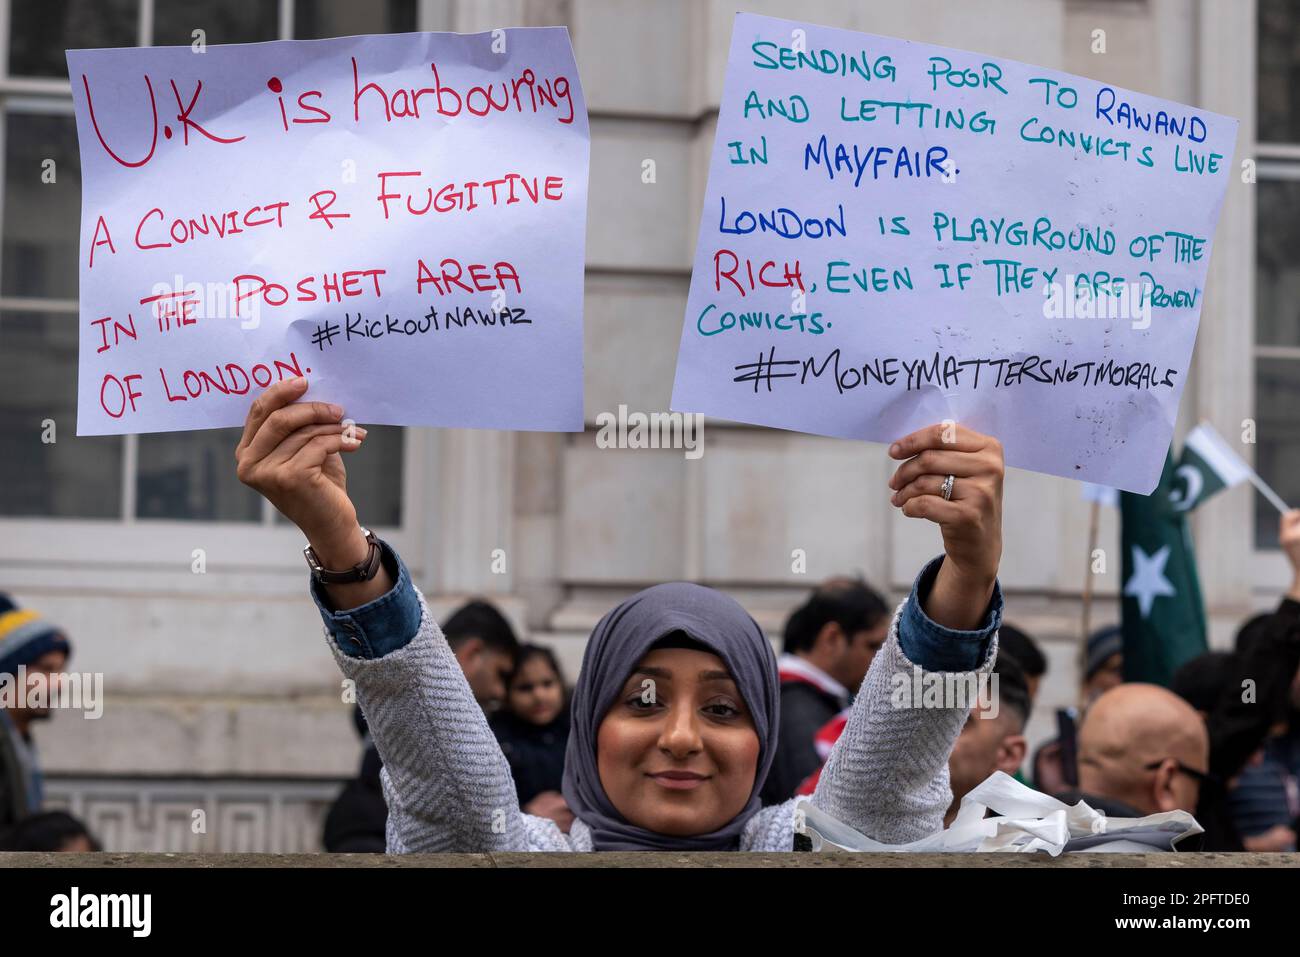 Female with placards against Nawaz Sharif who is living in London, UK. Accused of harbouring convict in Mayfair Stock Photo